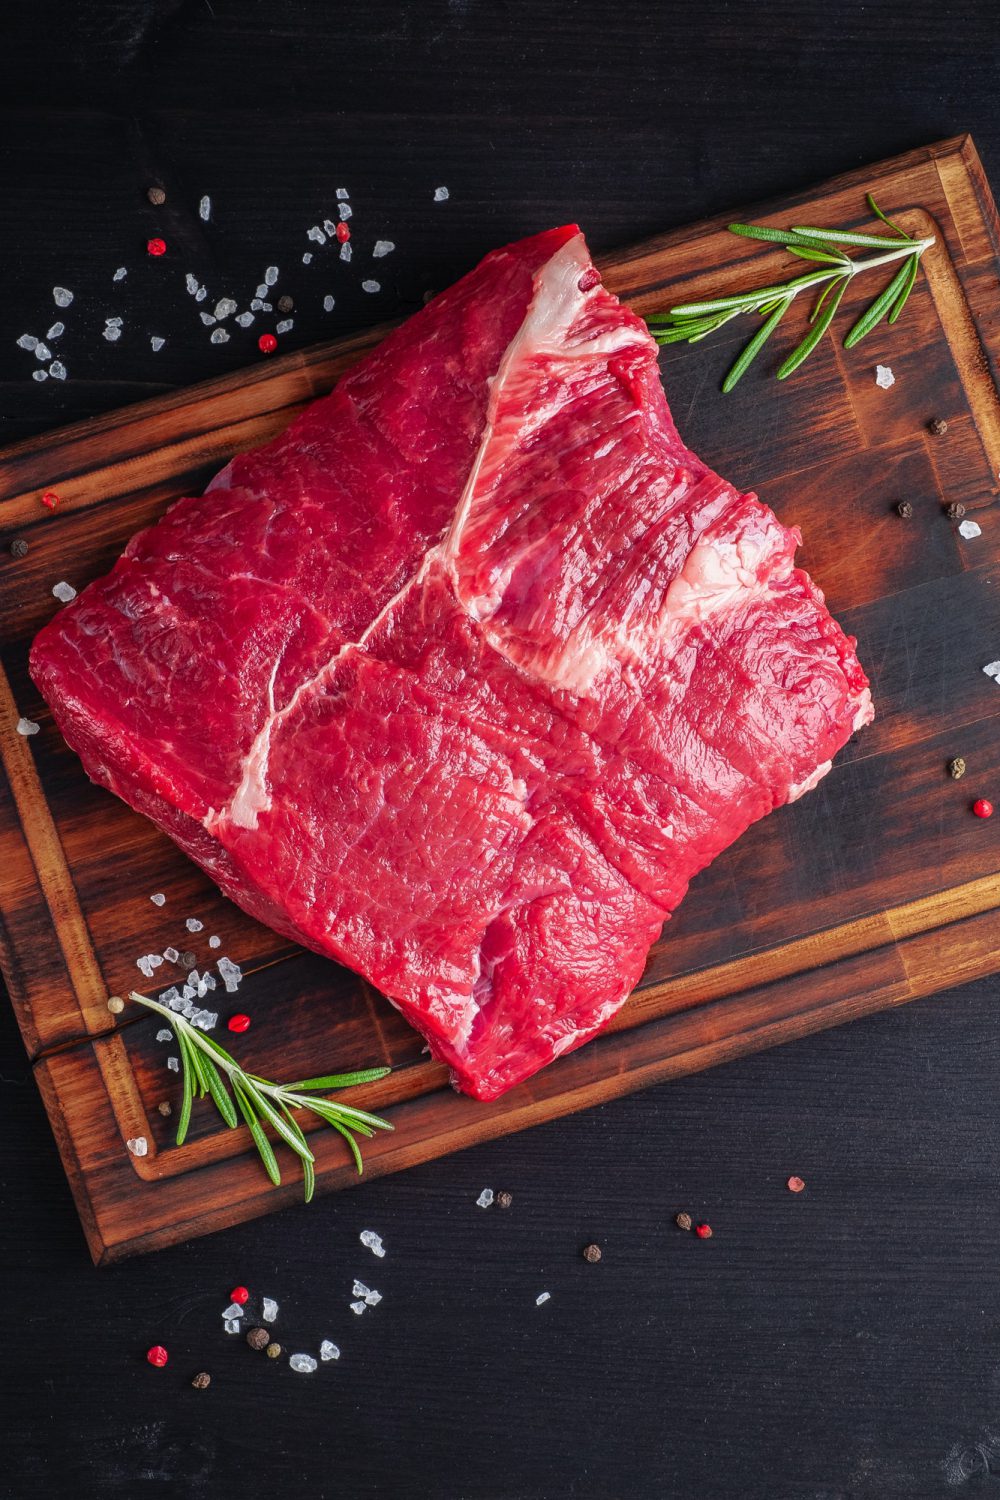 raw-meat-beef-steak-with-seasoning-on-chopping-board-on-dark-background-with-rosemary-.jpg